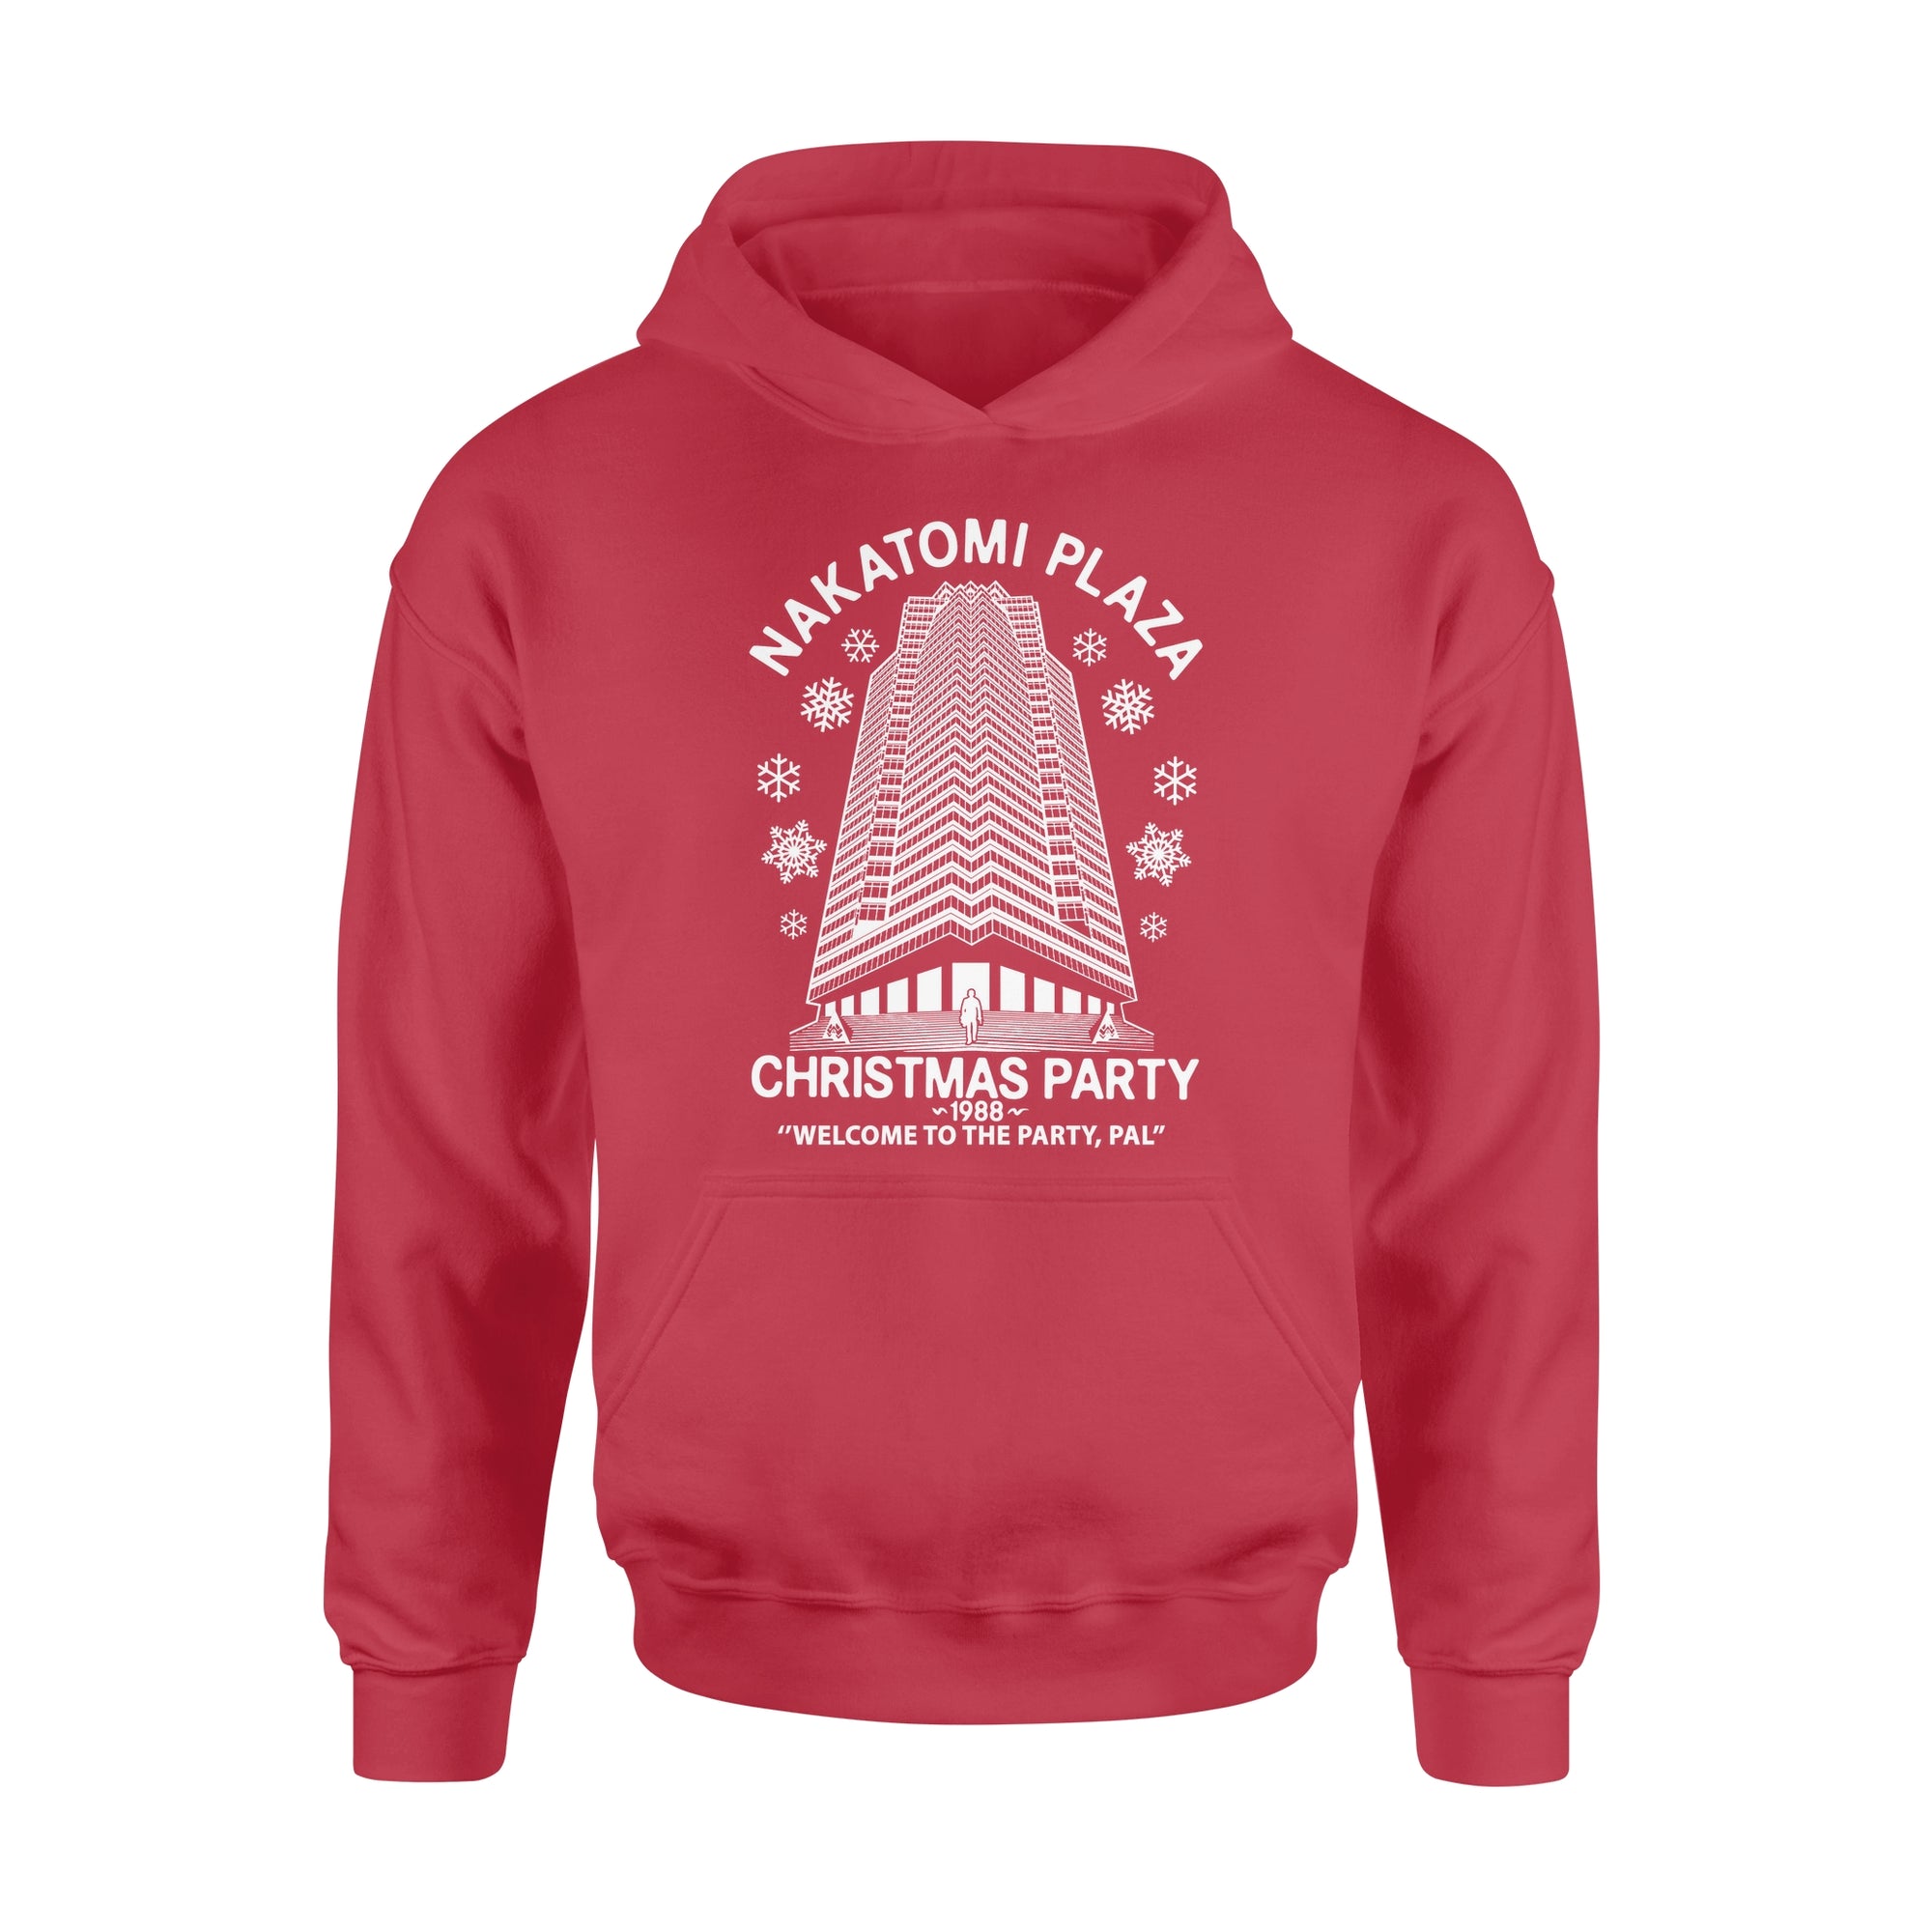 Christmas Party Nakatomi Plaza 1988 Welcome to The Christmas Party Die Hard Standard Hoodie